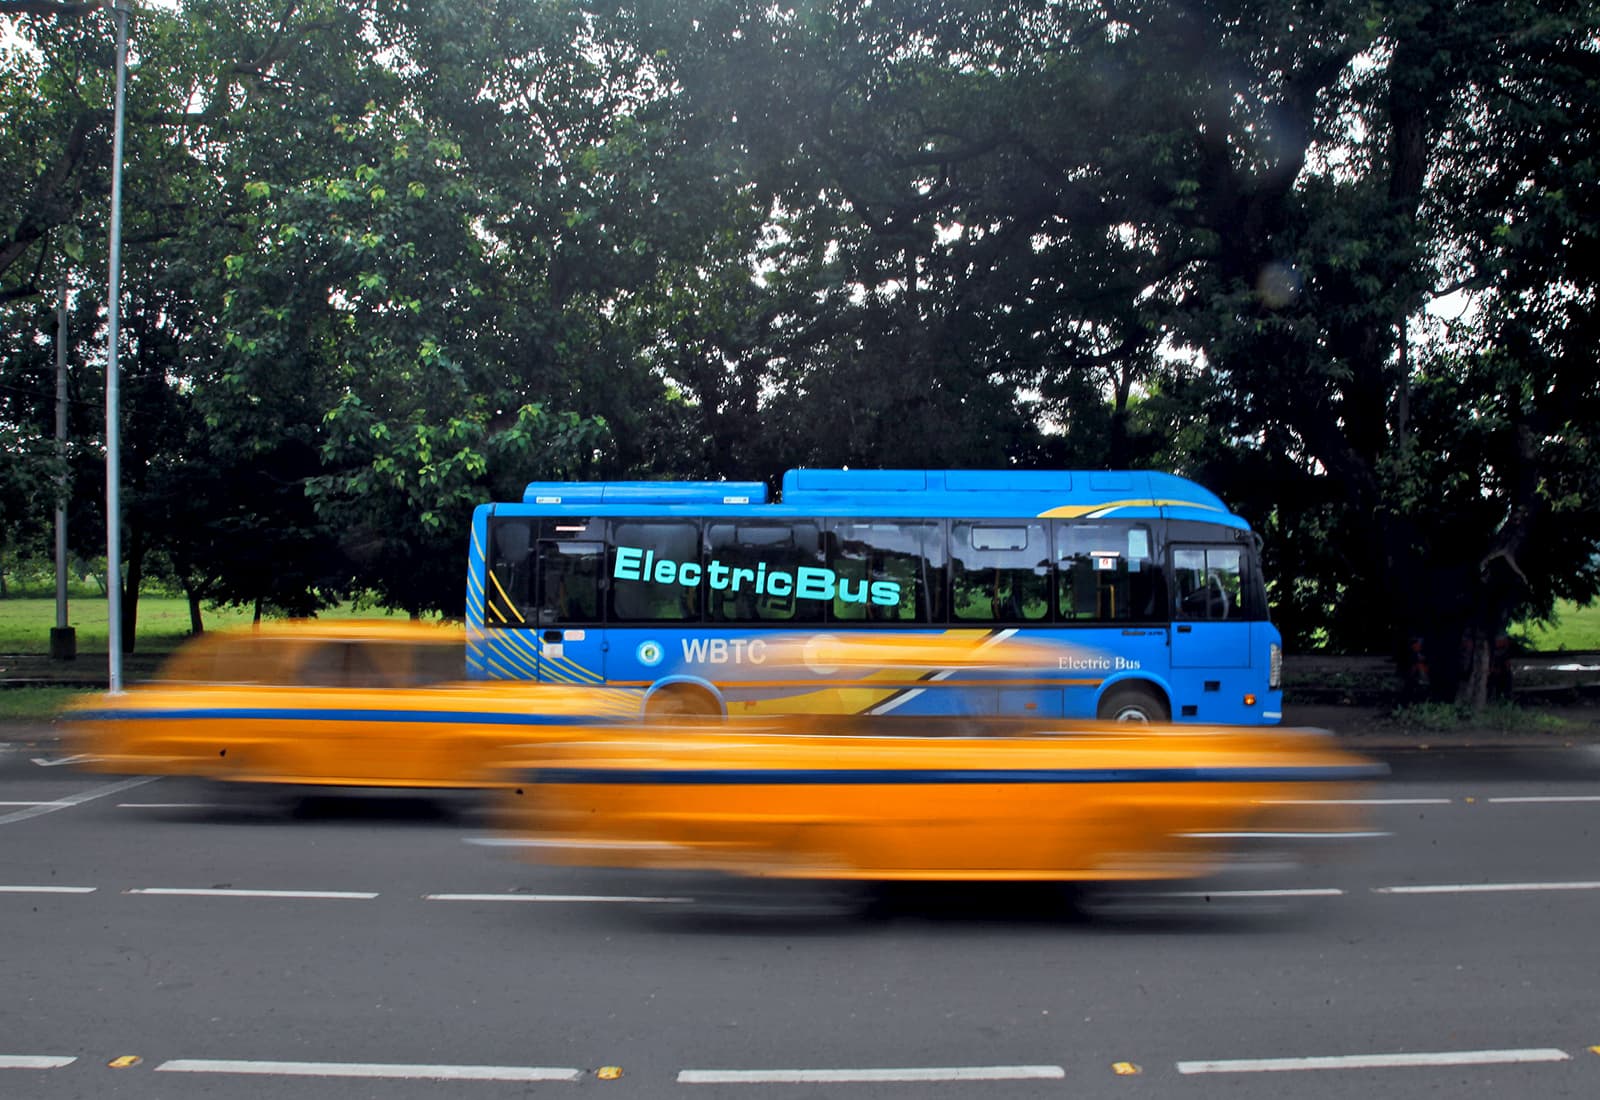 An electric bus on a road in Kolkata, India. Photo credit: Subrata Biswas and AP Images for C40 Cities